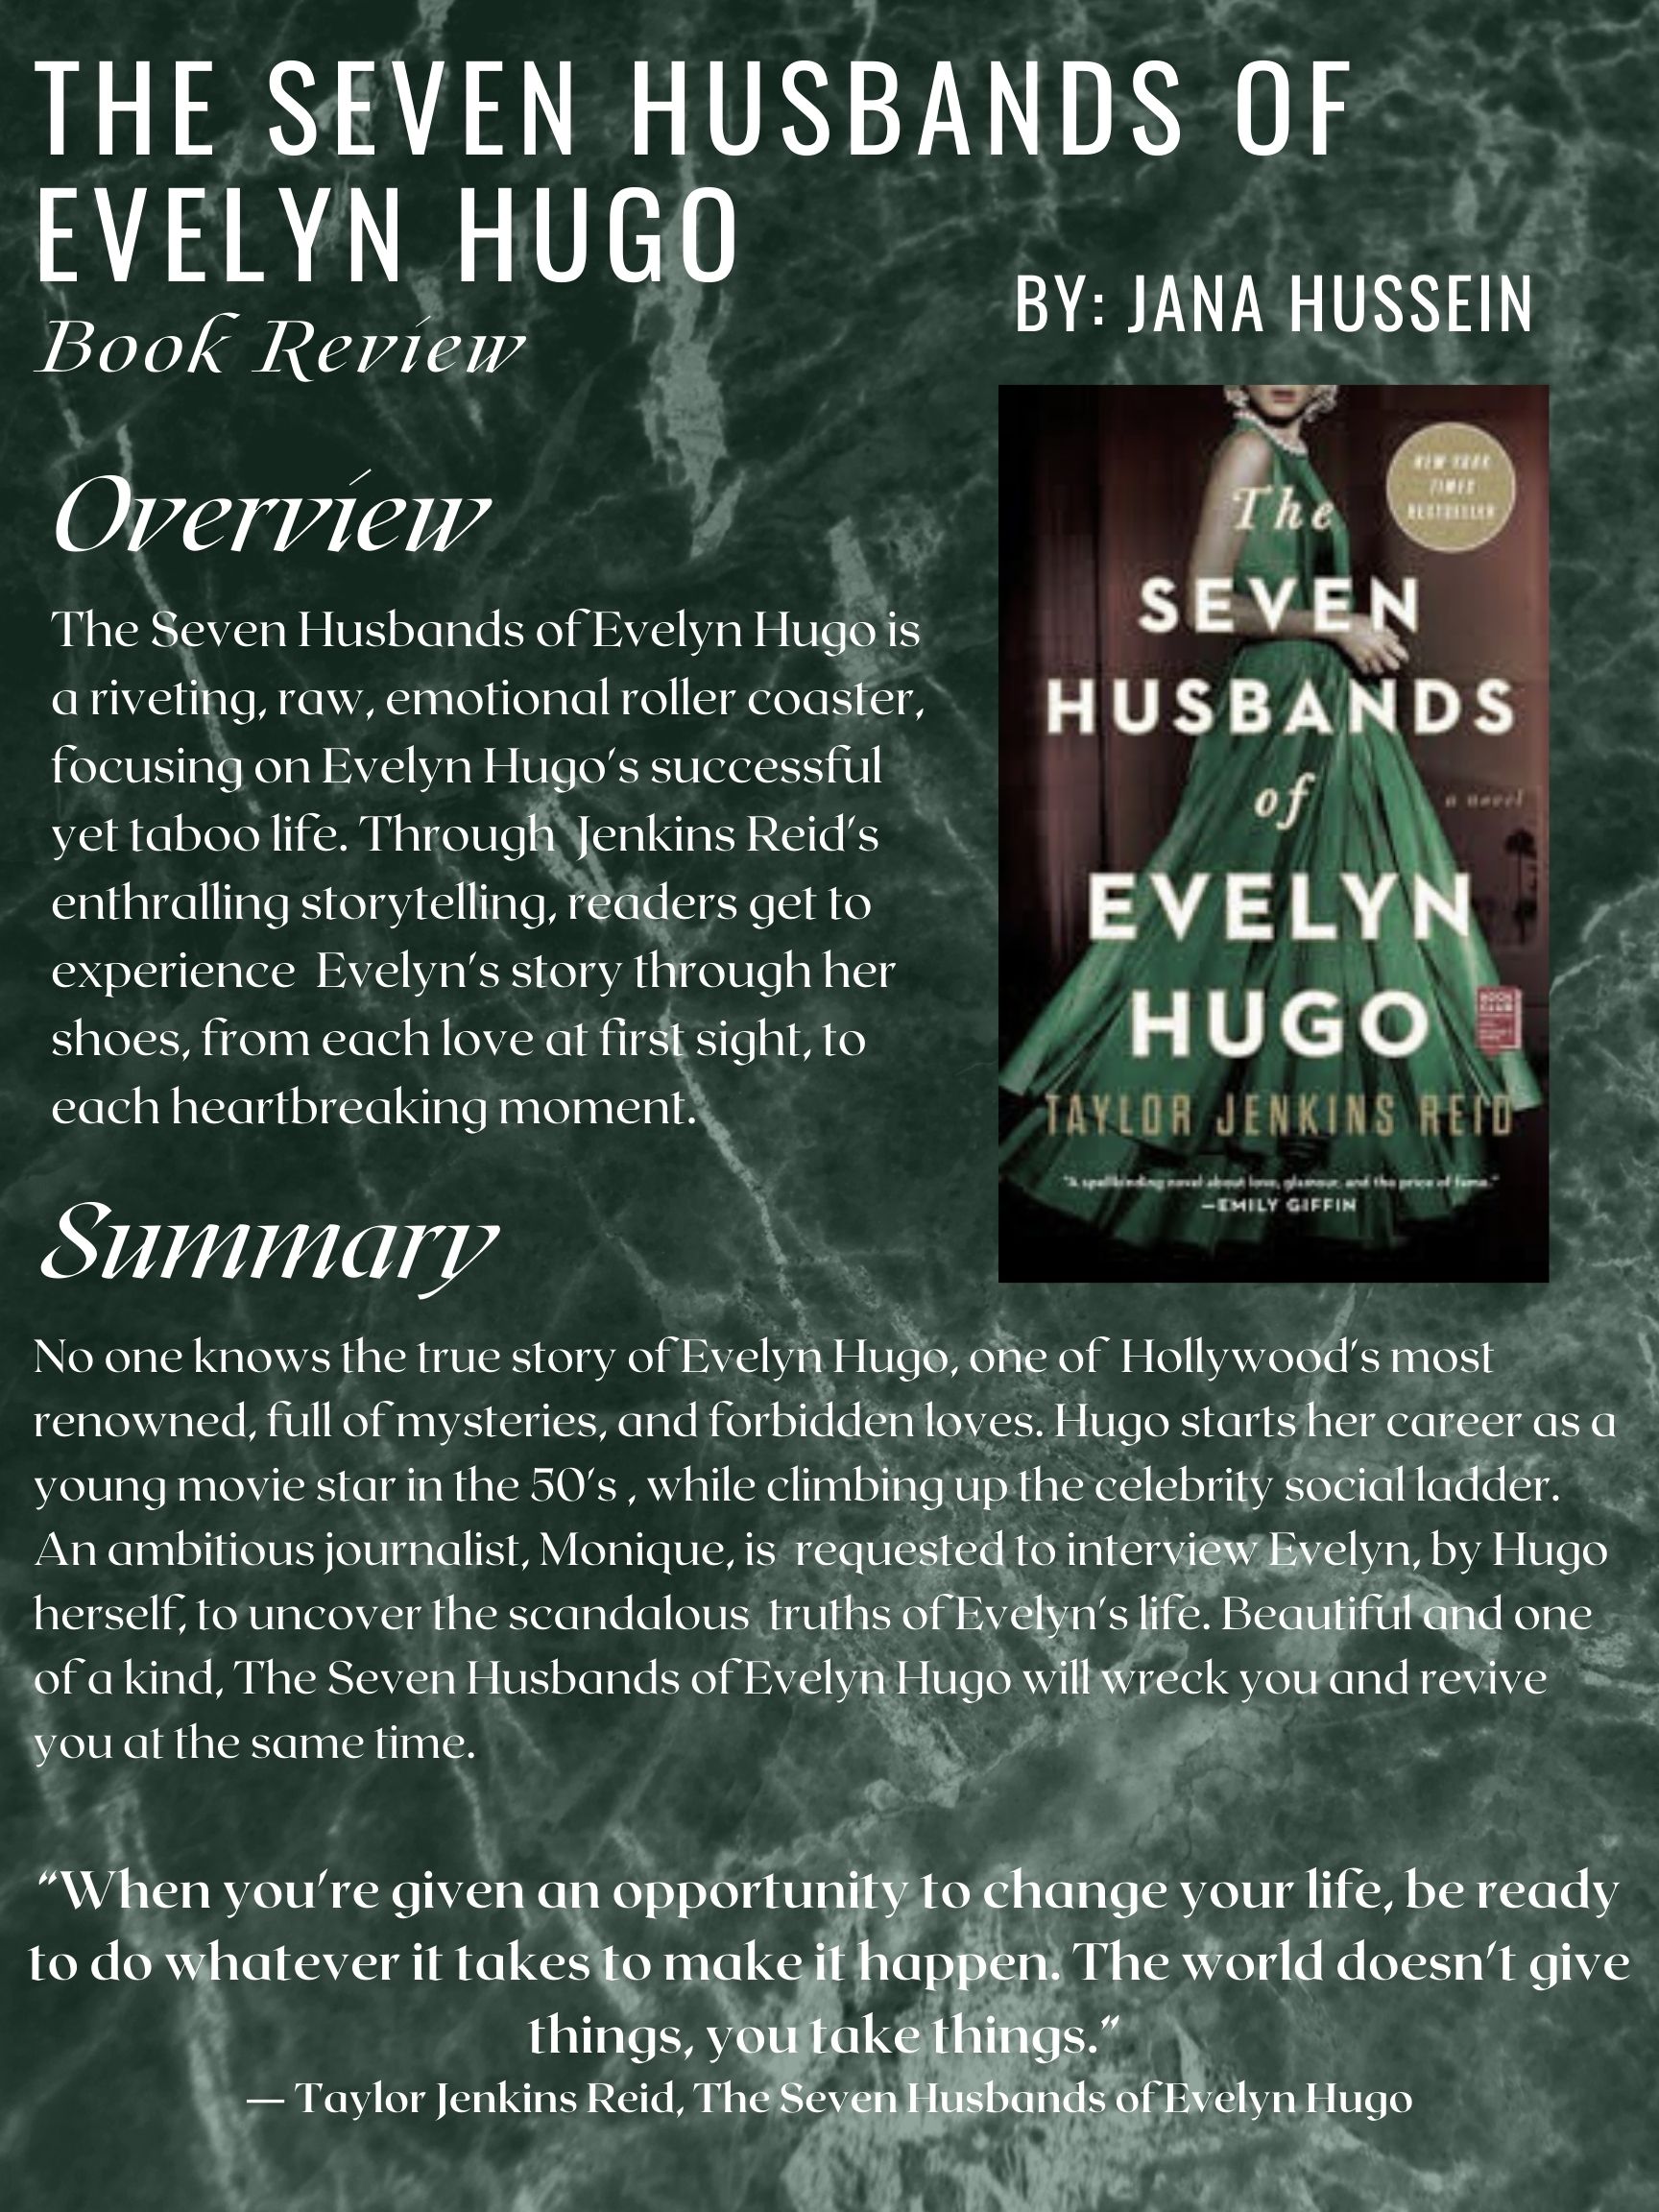 book review for the seven husbands of evelyn hugo